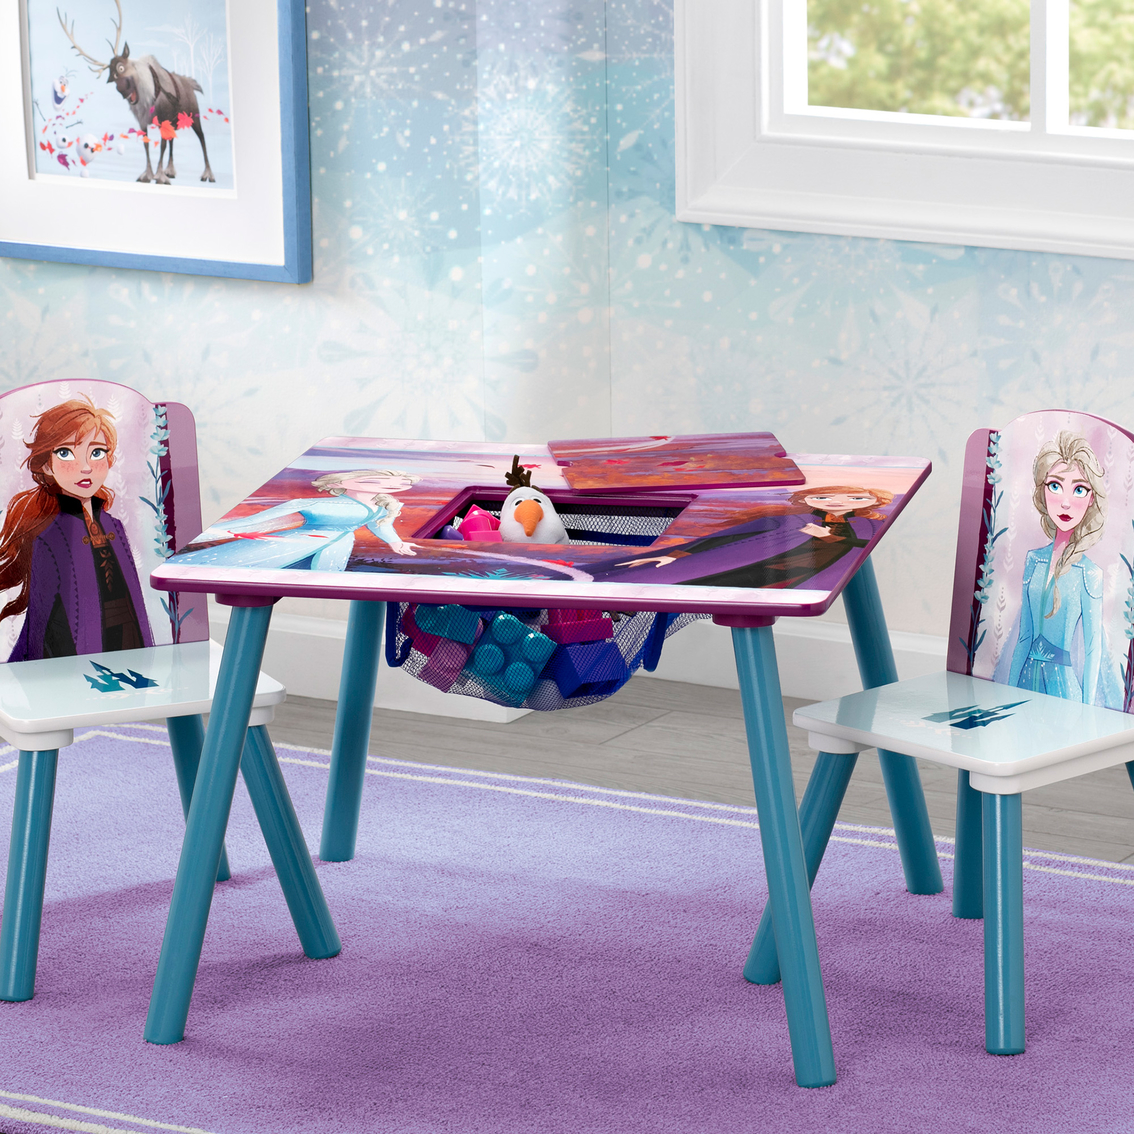 Delta Children Disney Frozen II Table and Chair Set with Storage - Image 5 of 6